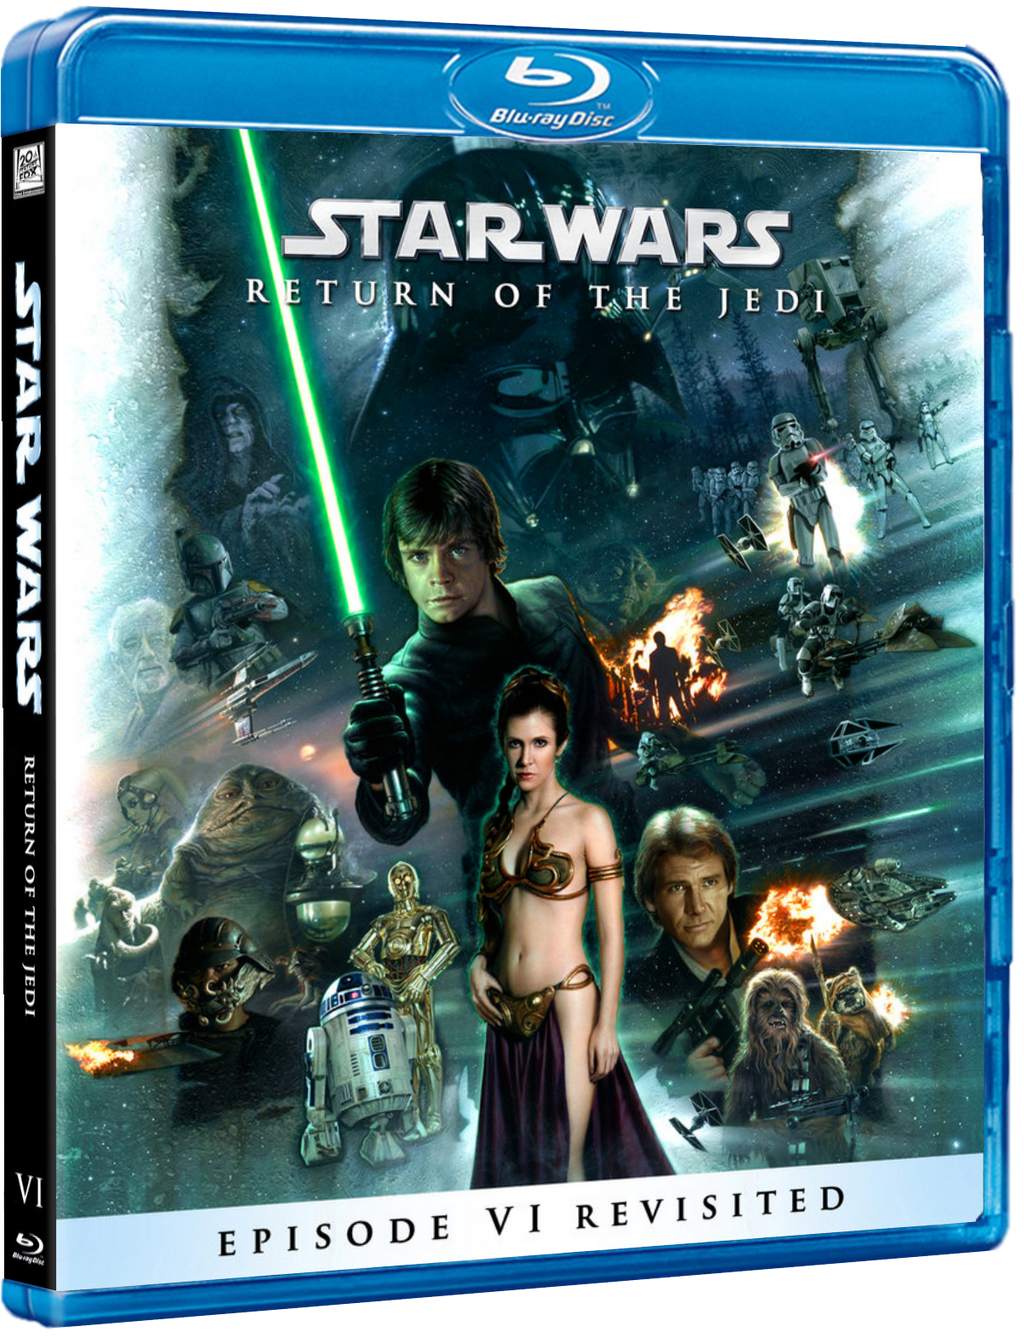 Star Wars 6 Blu Ray Cover by MattOliver21 on DeviantArt